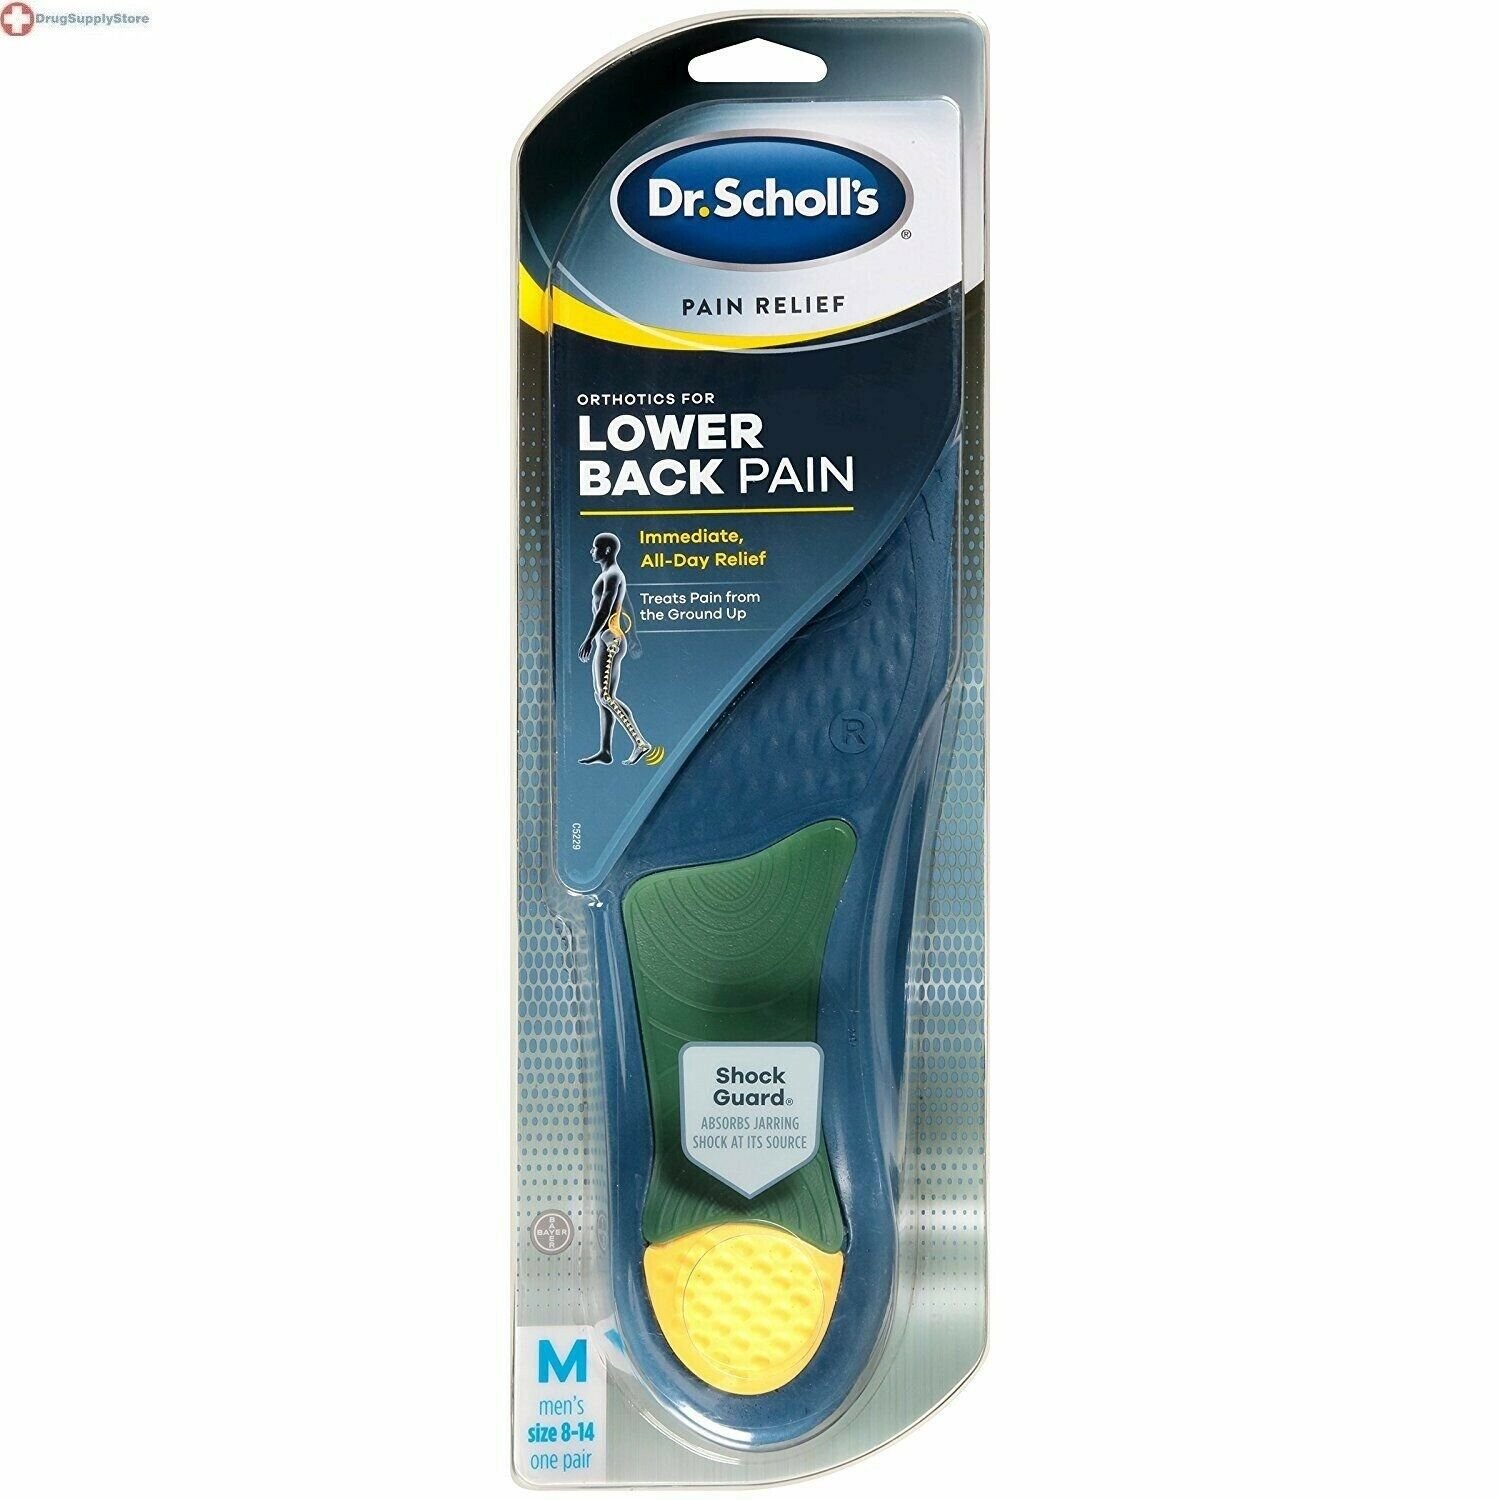 Dr. Scholl’s Pain Relief Orthotics for Lower Back Pain for Men 1 Pair ...